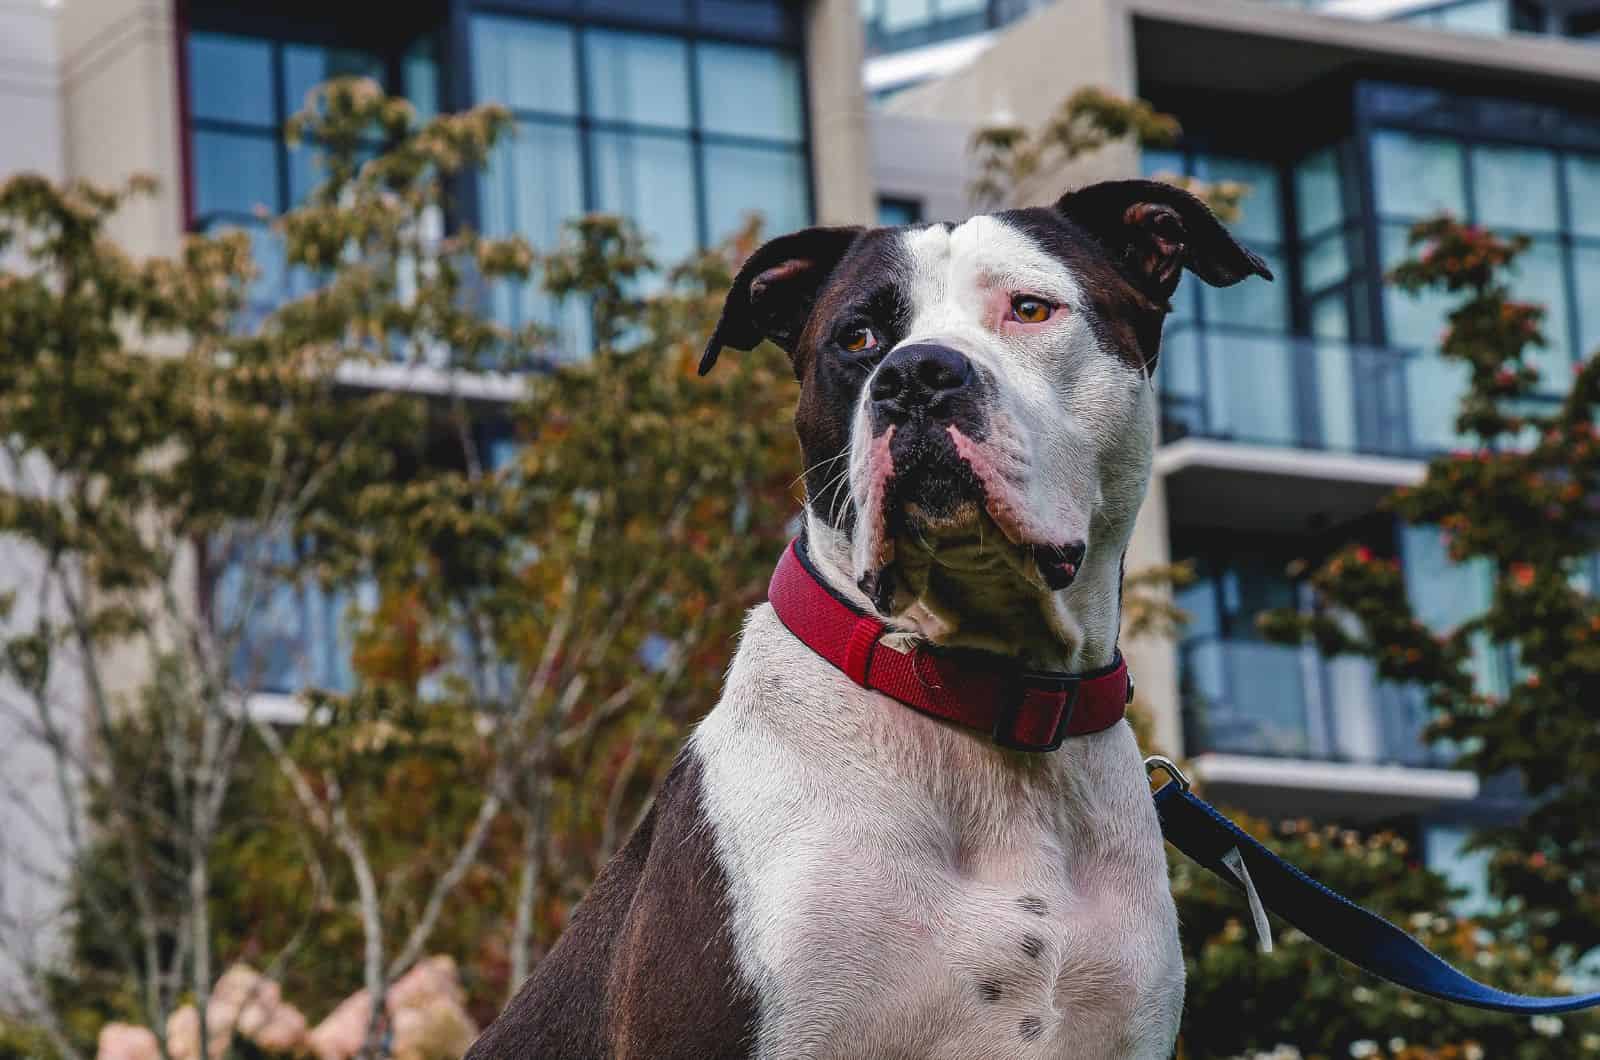 American Bulldog standing outside looking into distance